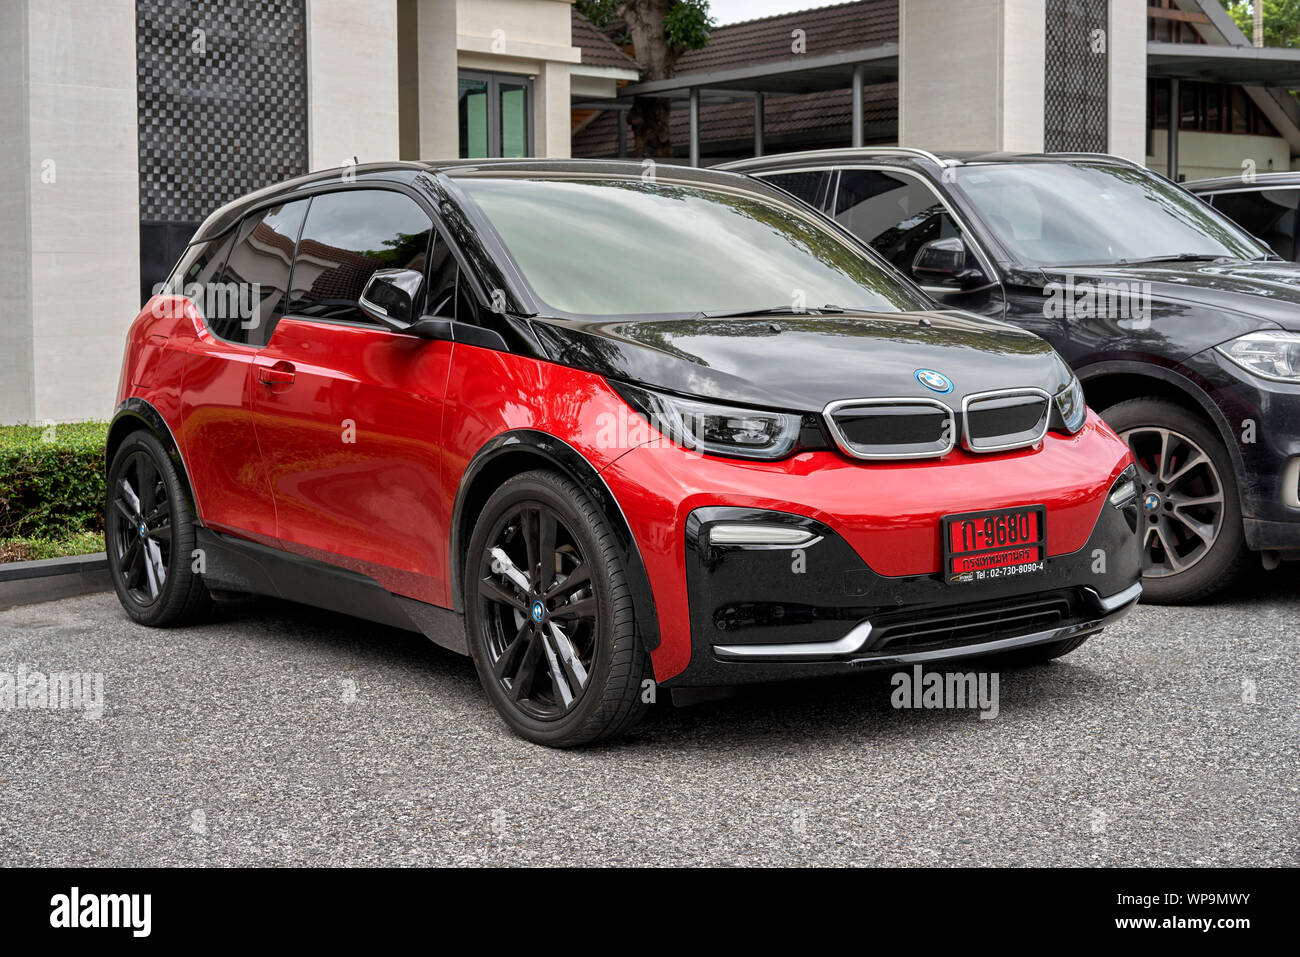 BMW i3s on red license plates signifying a new vehicle. Thailand car number plate Stock Photo